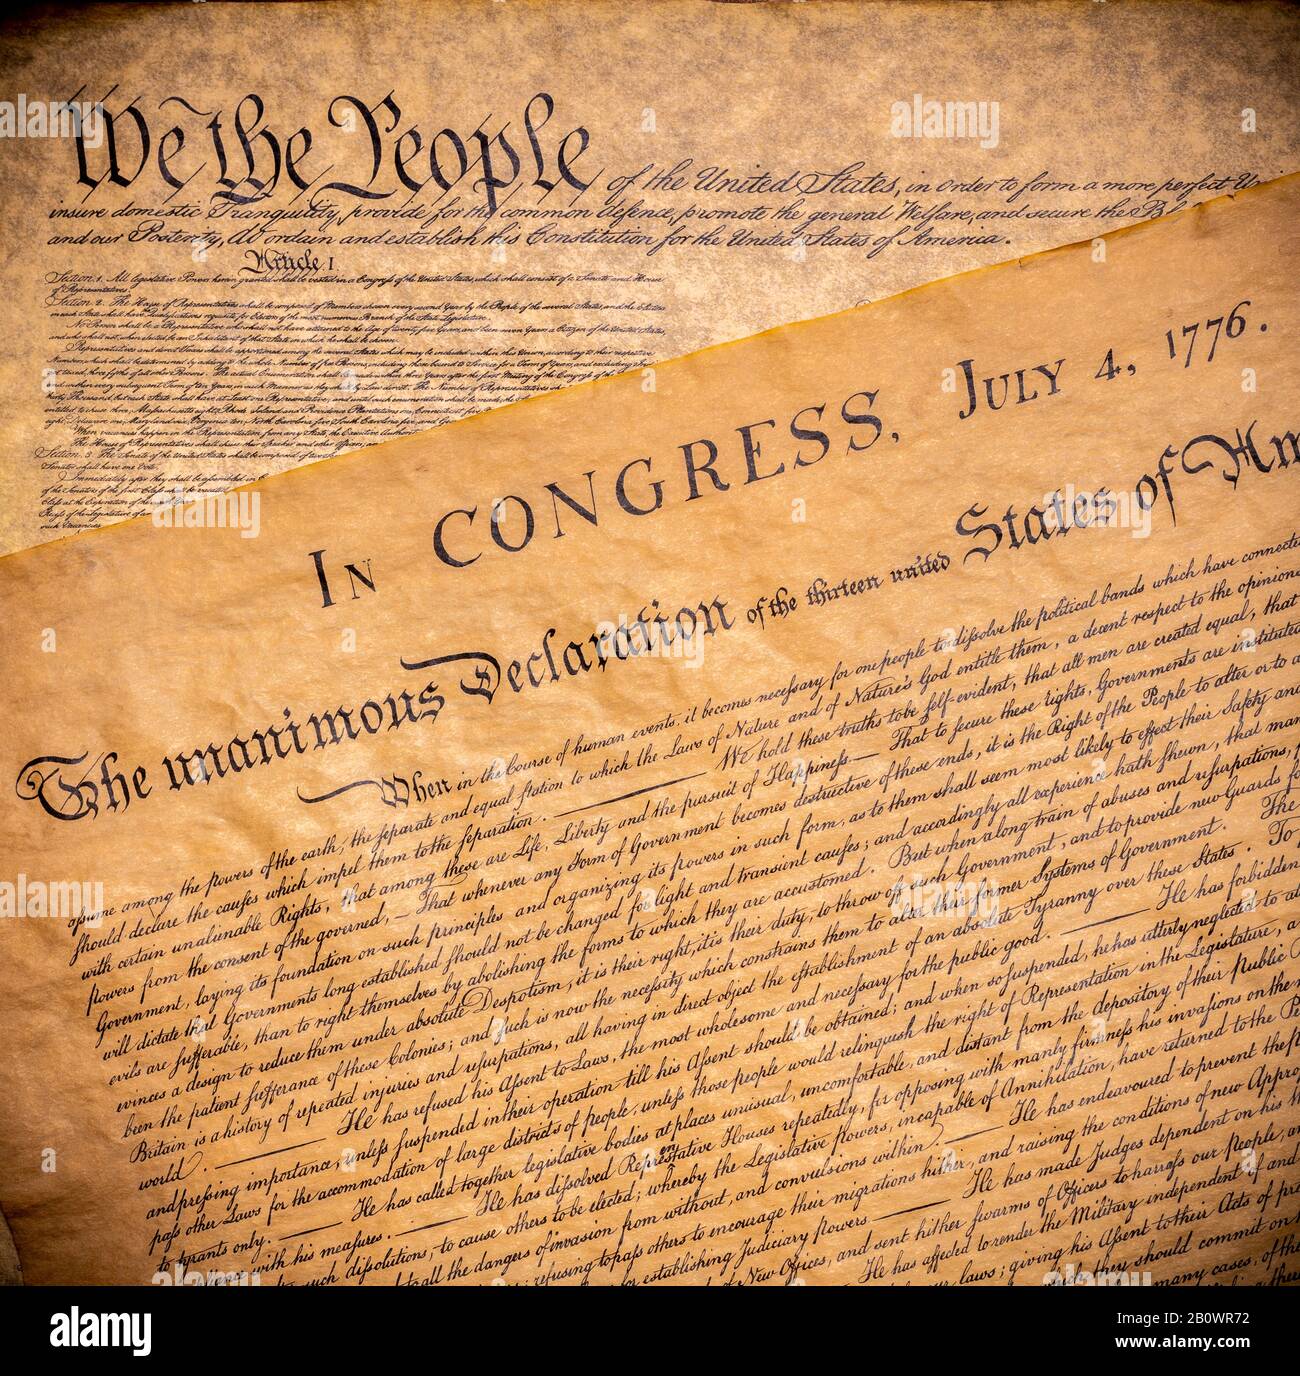 American founding documents. The constitution and Declaration of Independence. Stock Photo